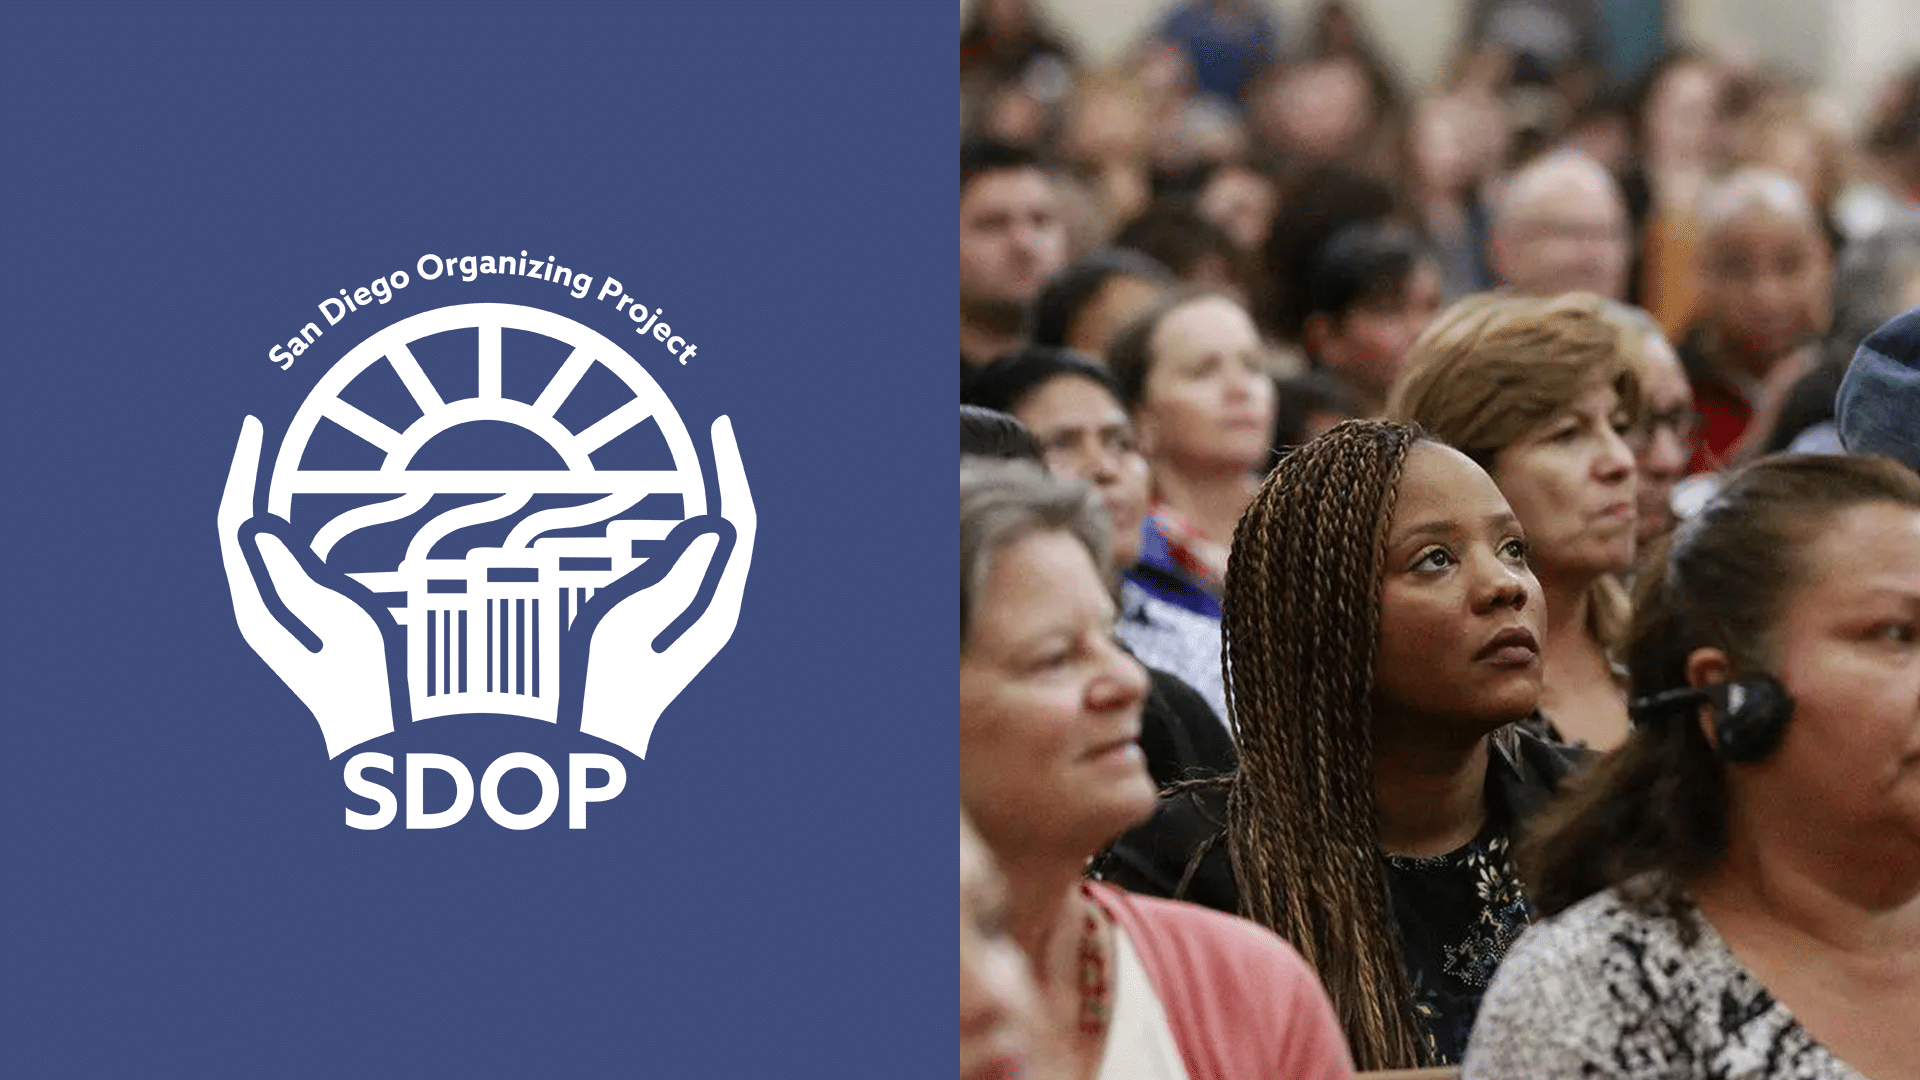 San Diego Organizing Project logo with a photo of a crowd of people listening to a speaker